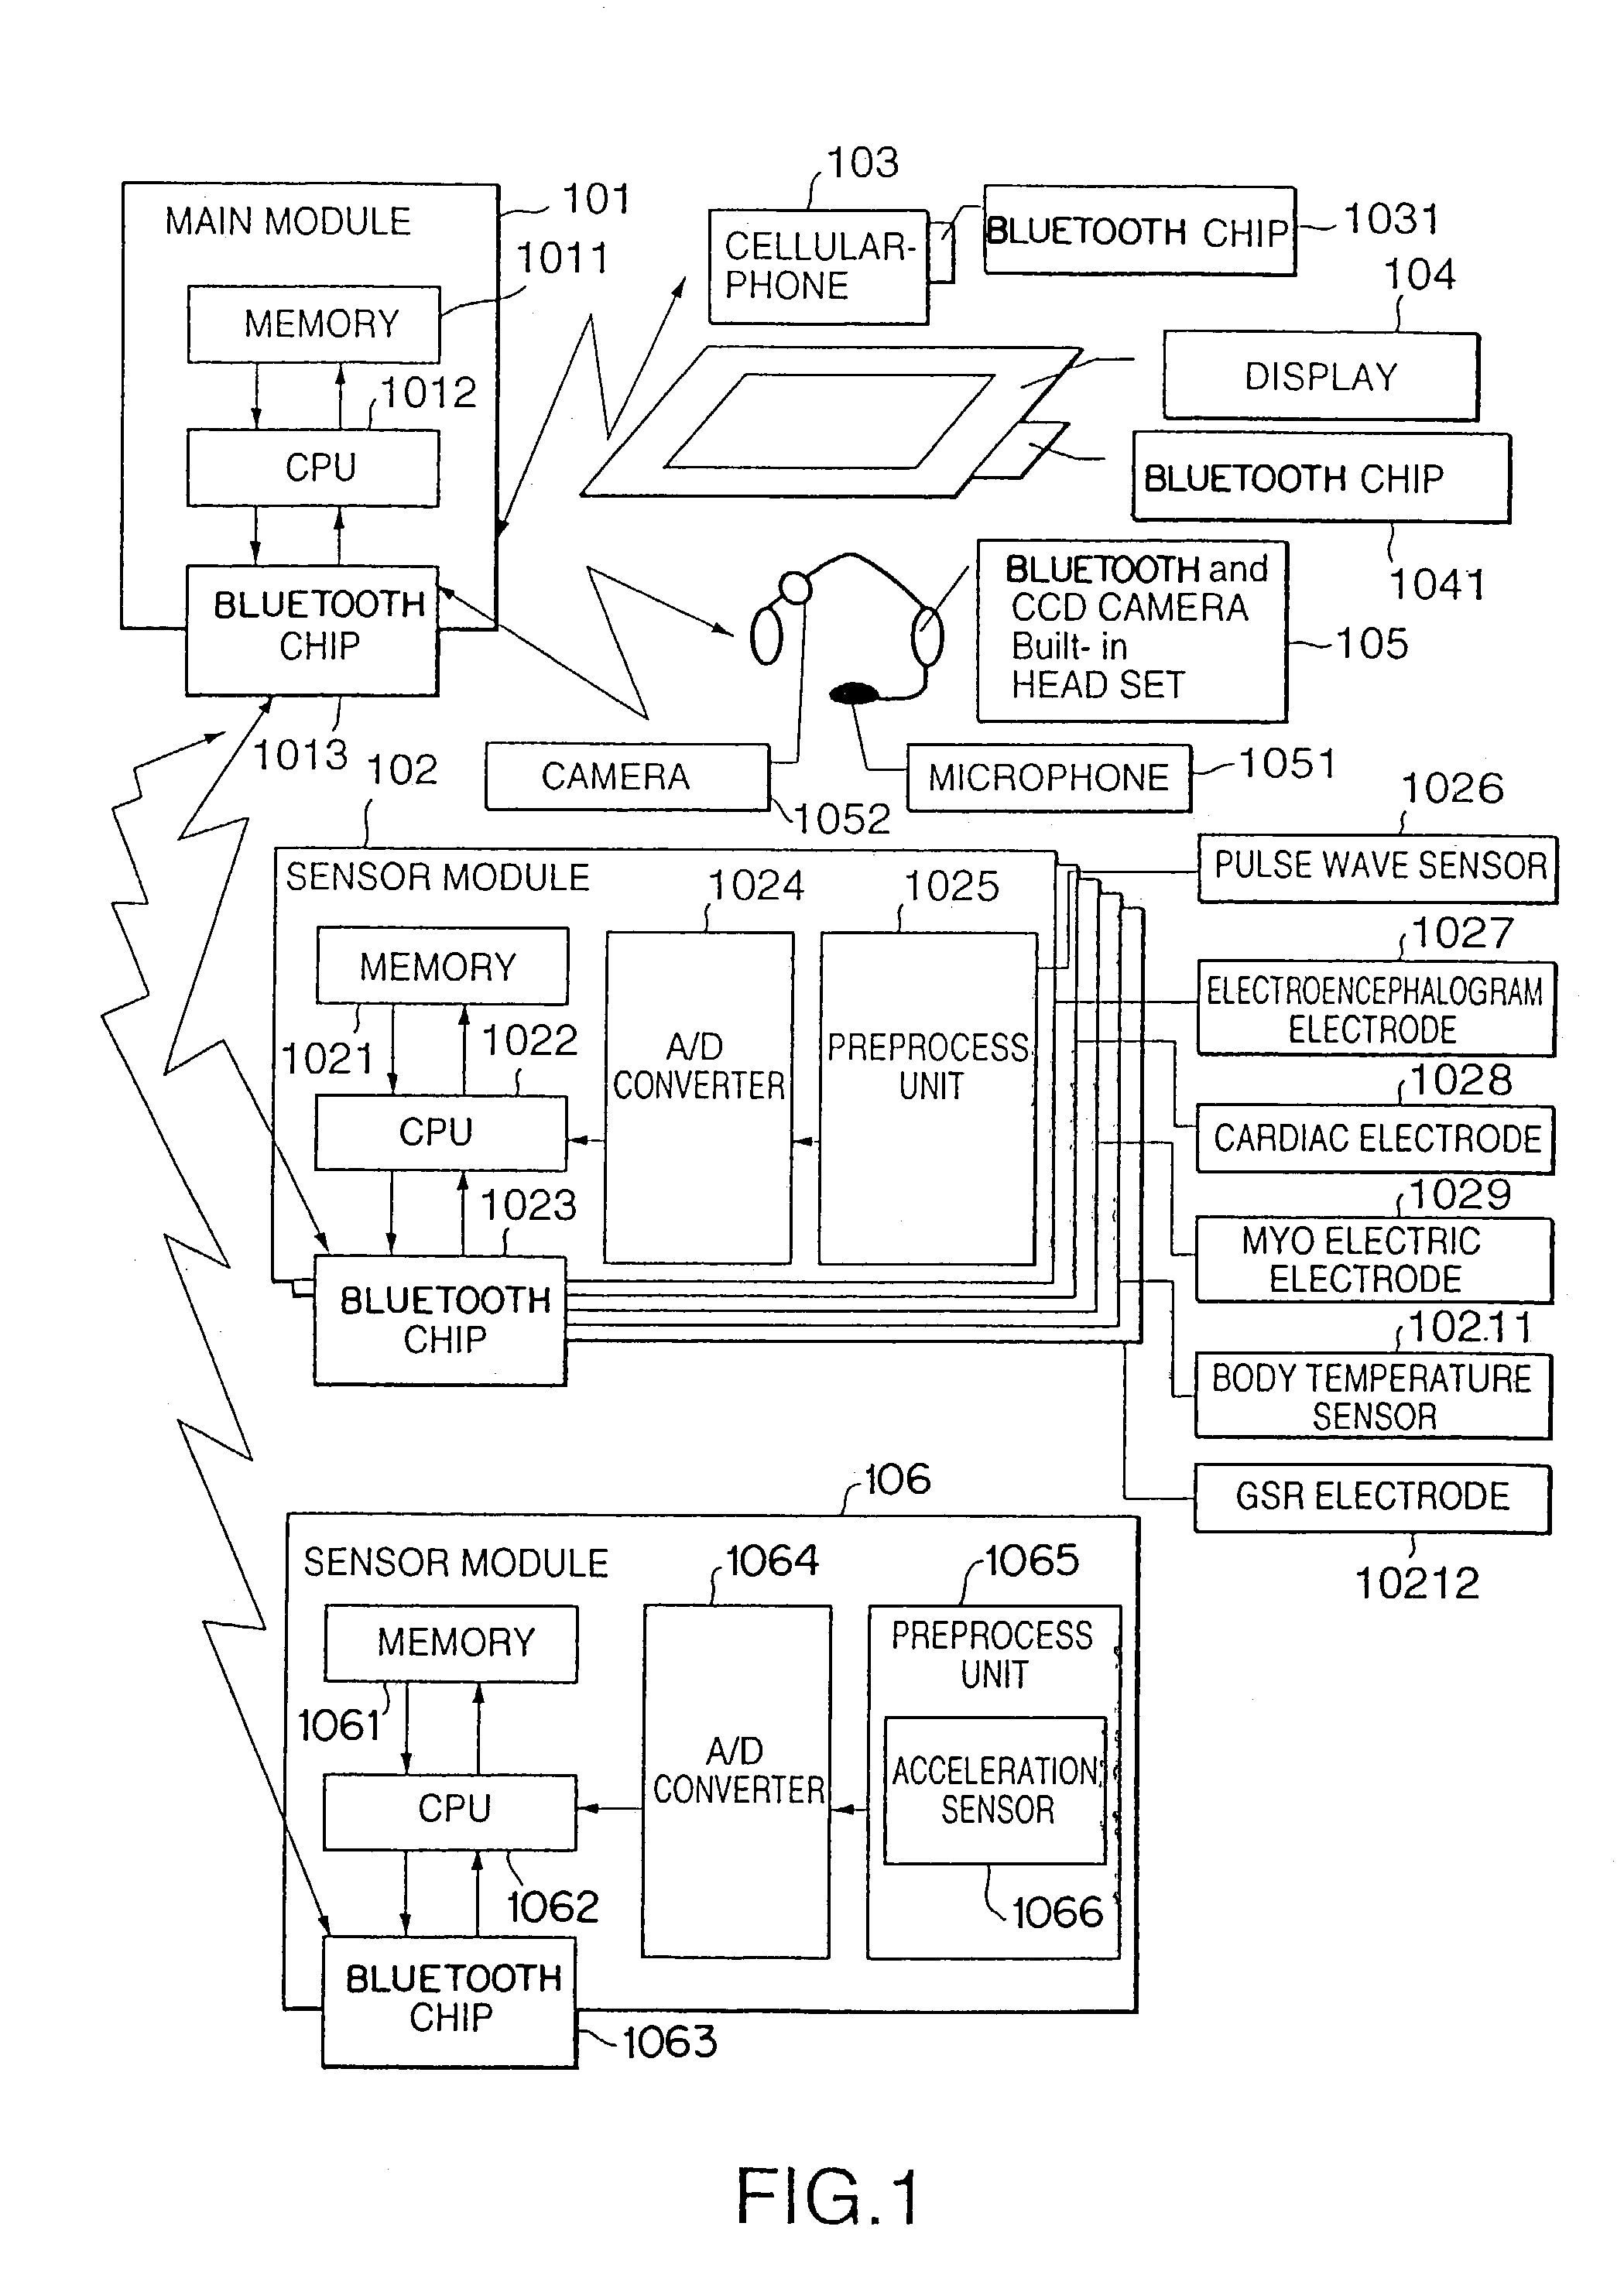 Wearable life support apparatus and method